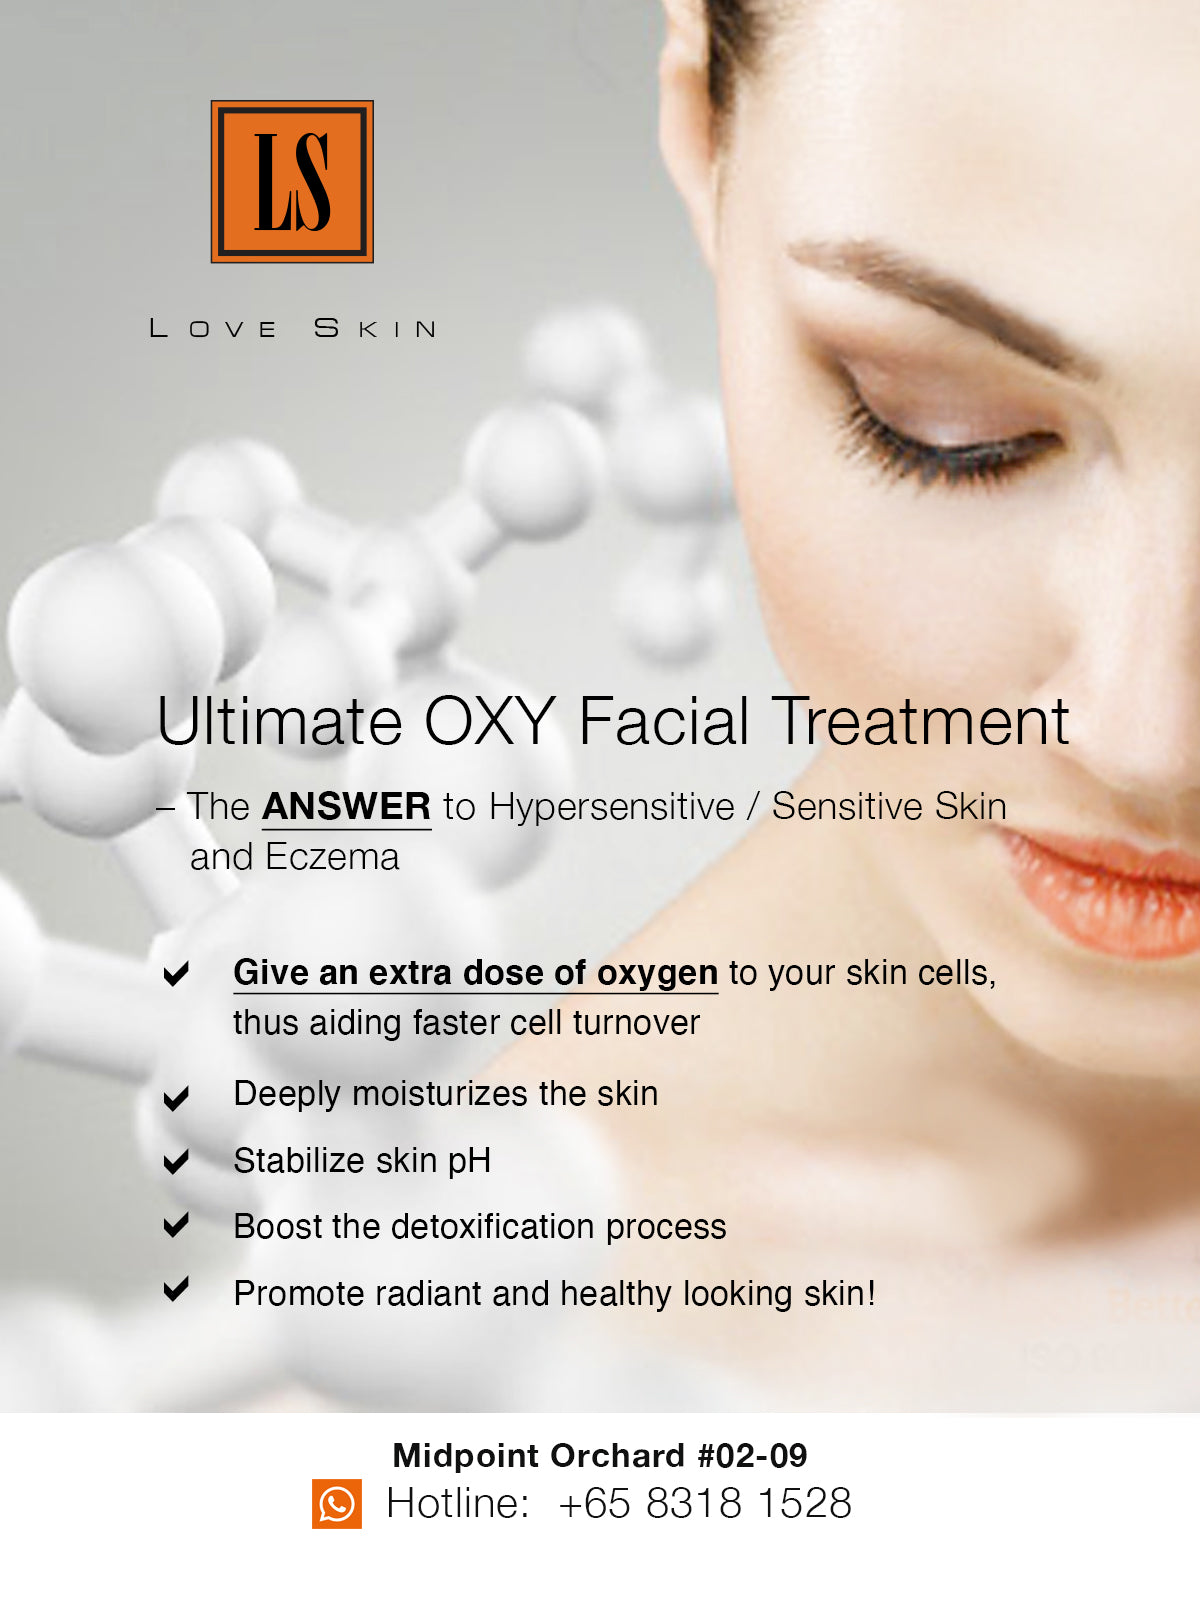 [S190014-90] Ultimate OXY Facial Treatment - Sensitive Skin Treatment with 7 GREAT Benefits!